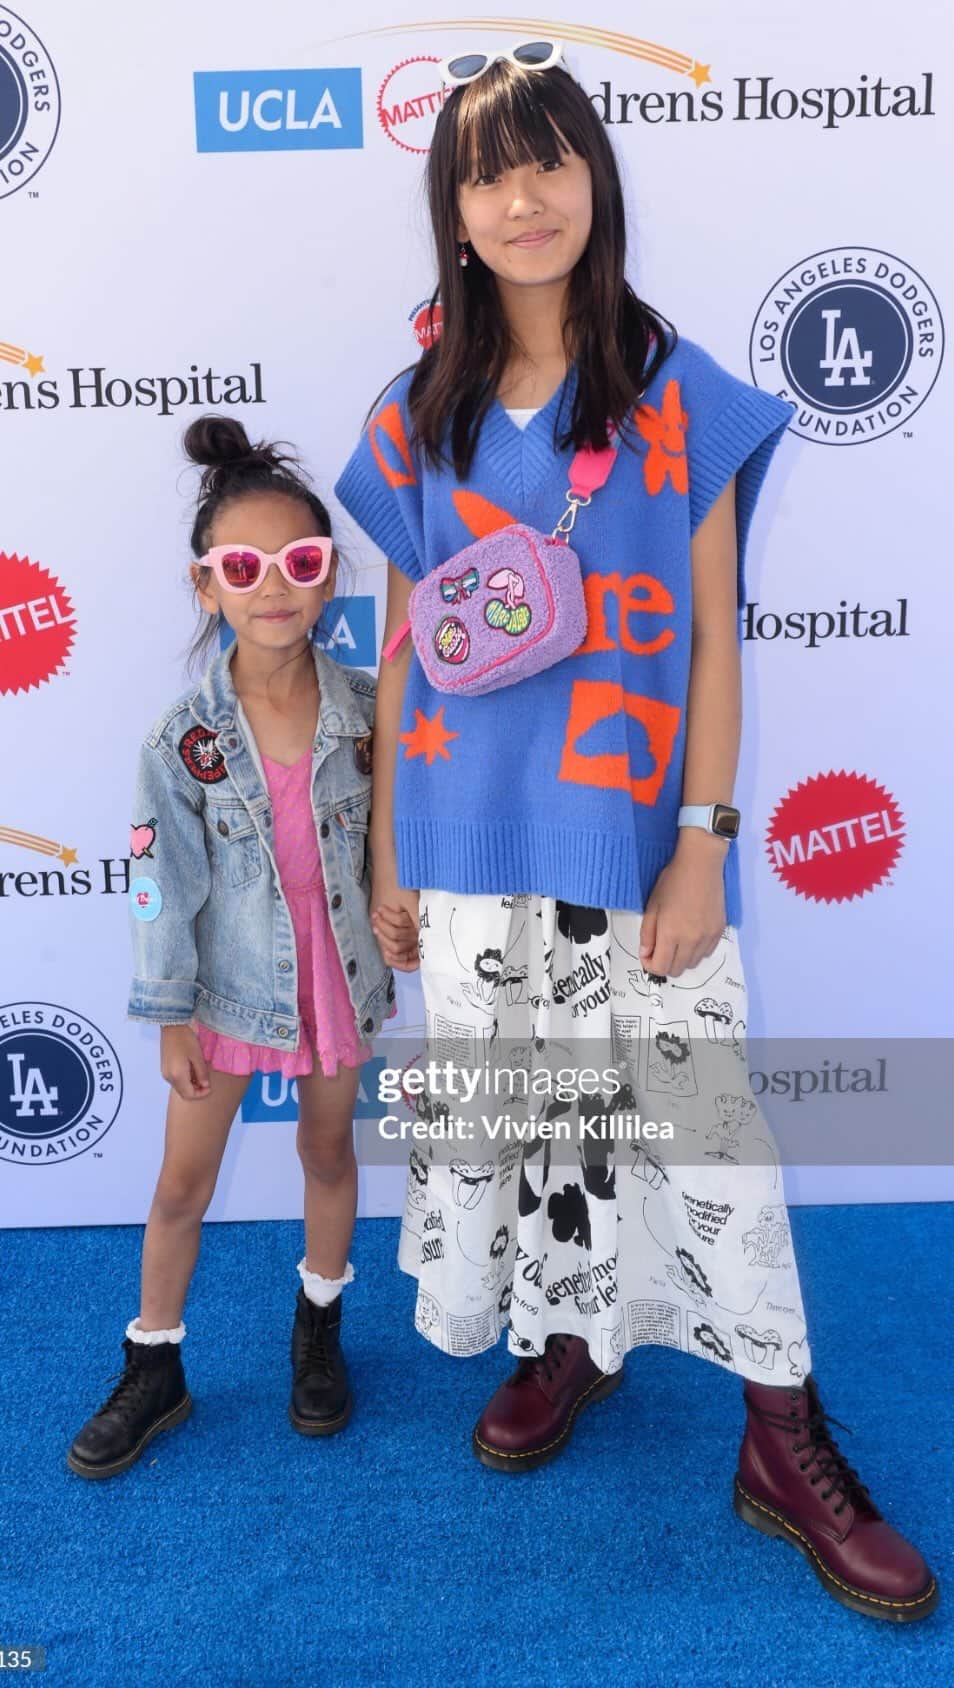 Zooey Miyoshiのインスタグラム：「Honored to be a part of #MattelPOP and support the children at @UCLAMCH. This is always such a cute event, and we loved being able to donate all the toys we won to the hospital. It’s always fun running into friends too! #PlayItForward  Outfits:   Zooey:  Vest + skirt: @lazyoaf Bag: @marcjacobs / @kids_around  Amelie: Dress: @littleminis  Denim jacket: @heybabela   Boots: @drmartensusa  Sunnies: @wearesonsanddaughters」